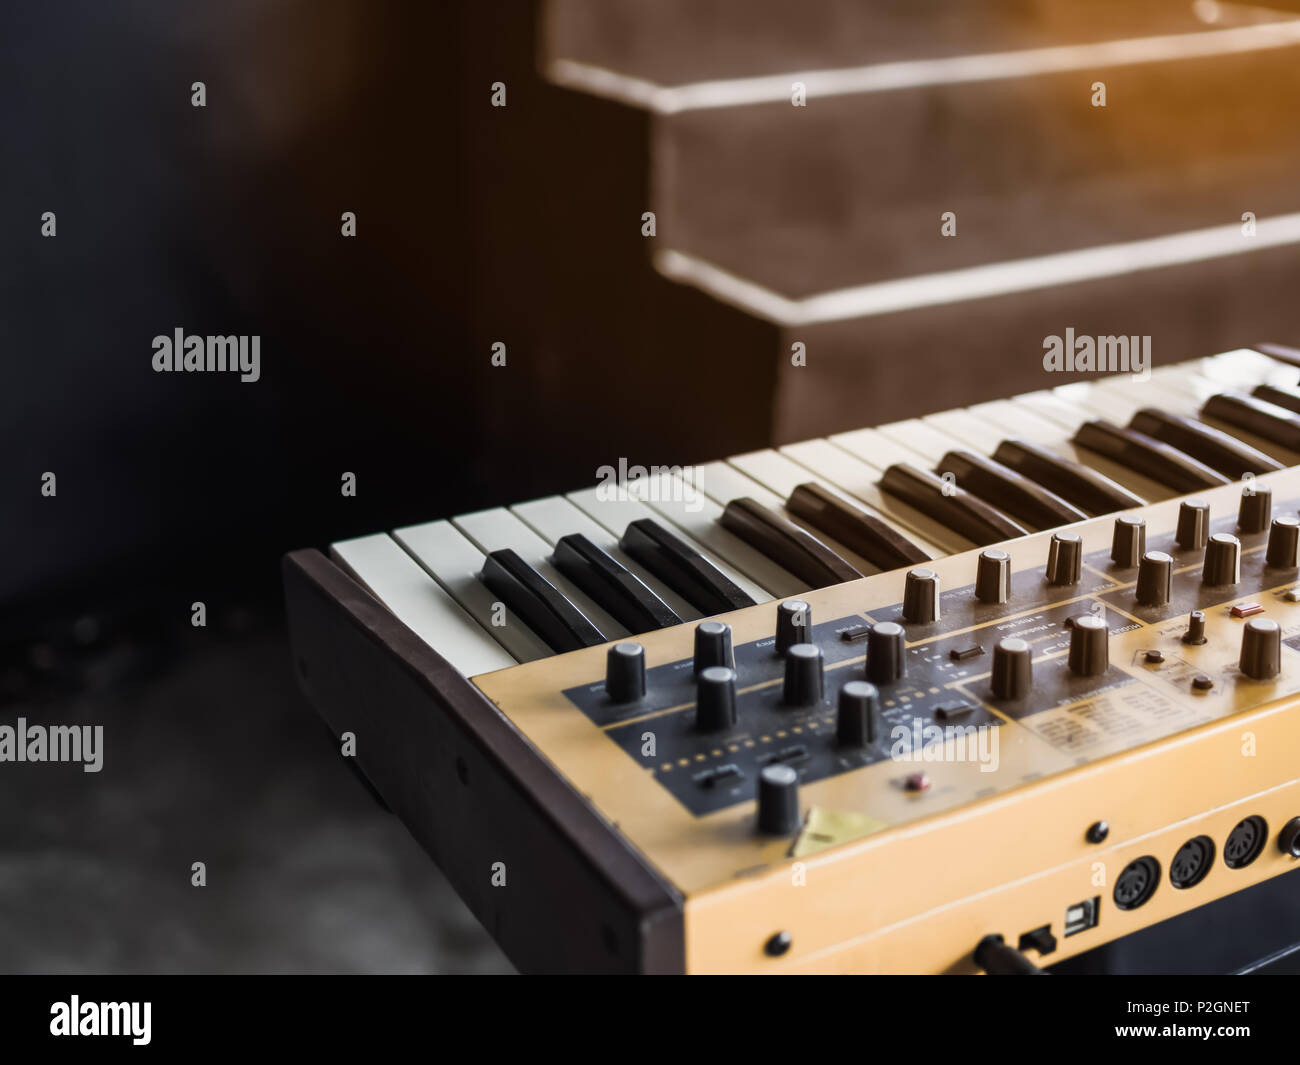 Synthesizers Keyboard, Equipment in Concert Backstage Ready to Play Stock Photo